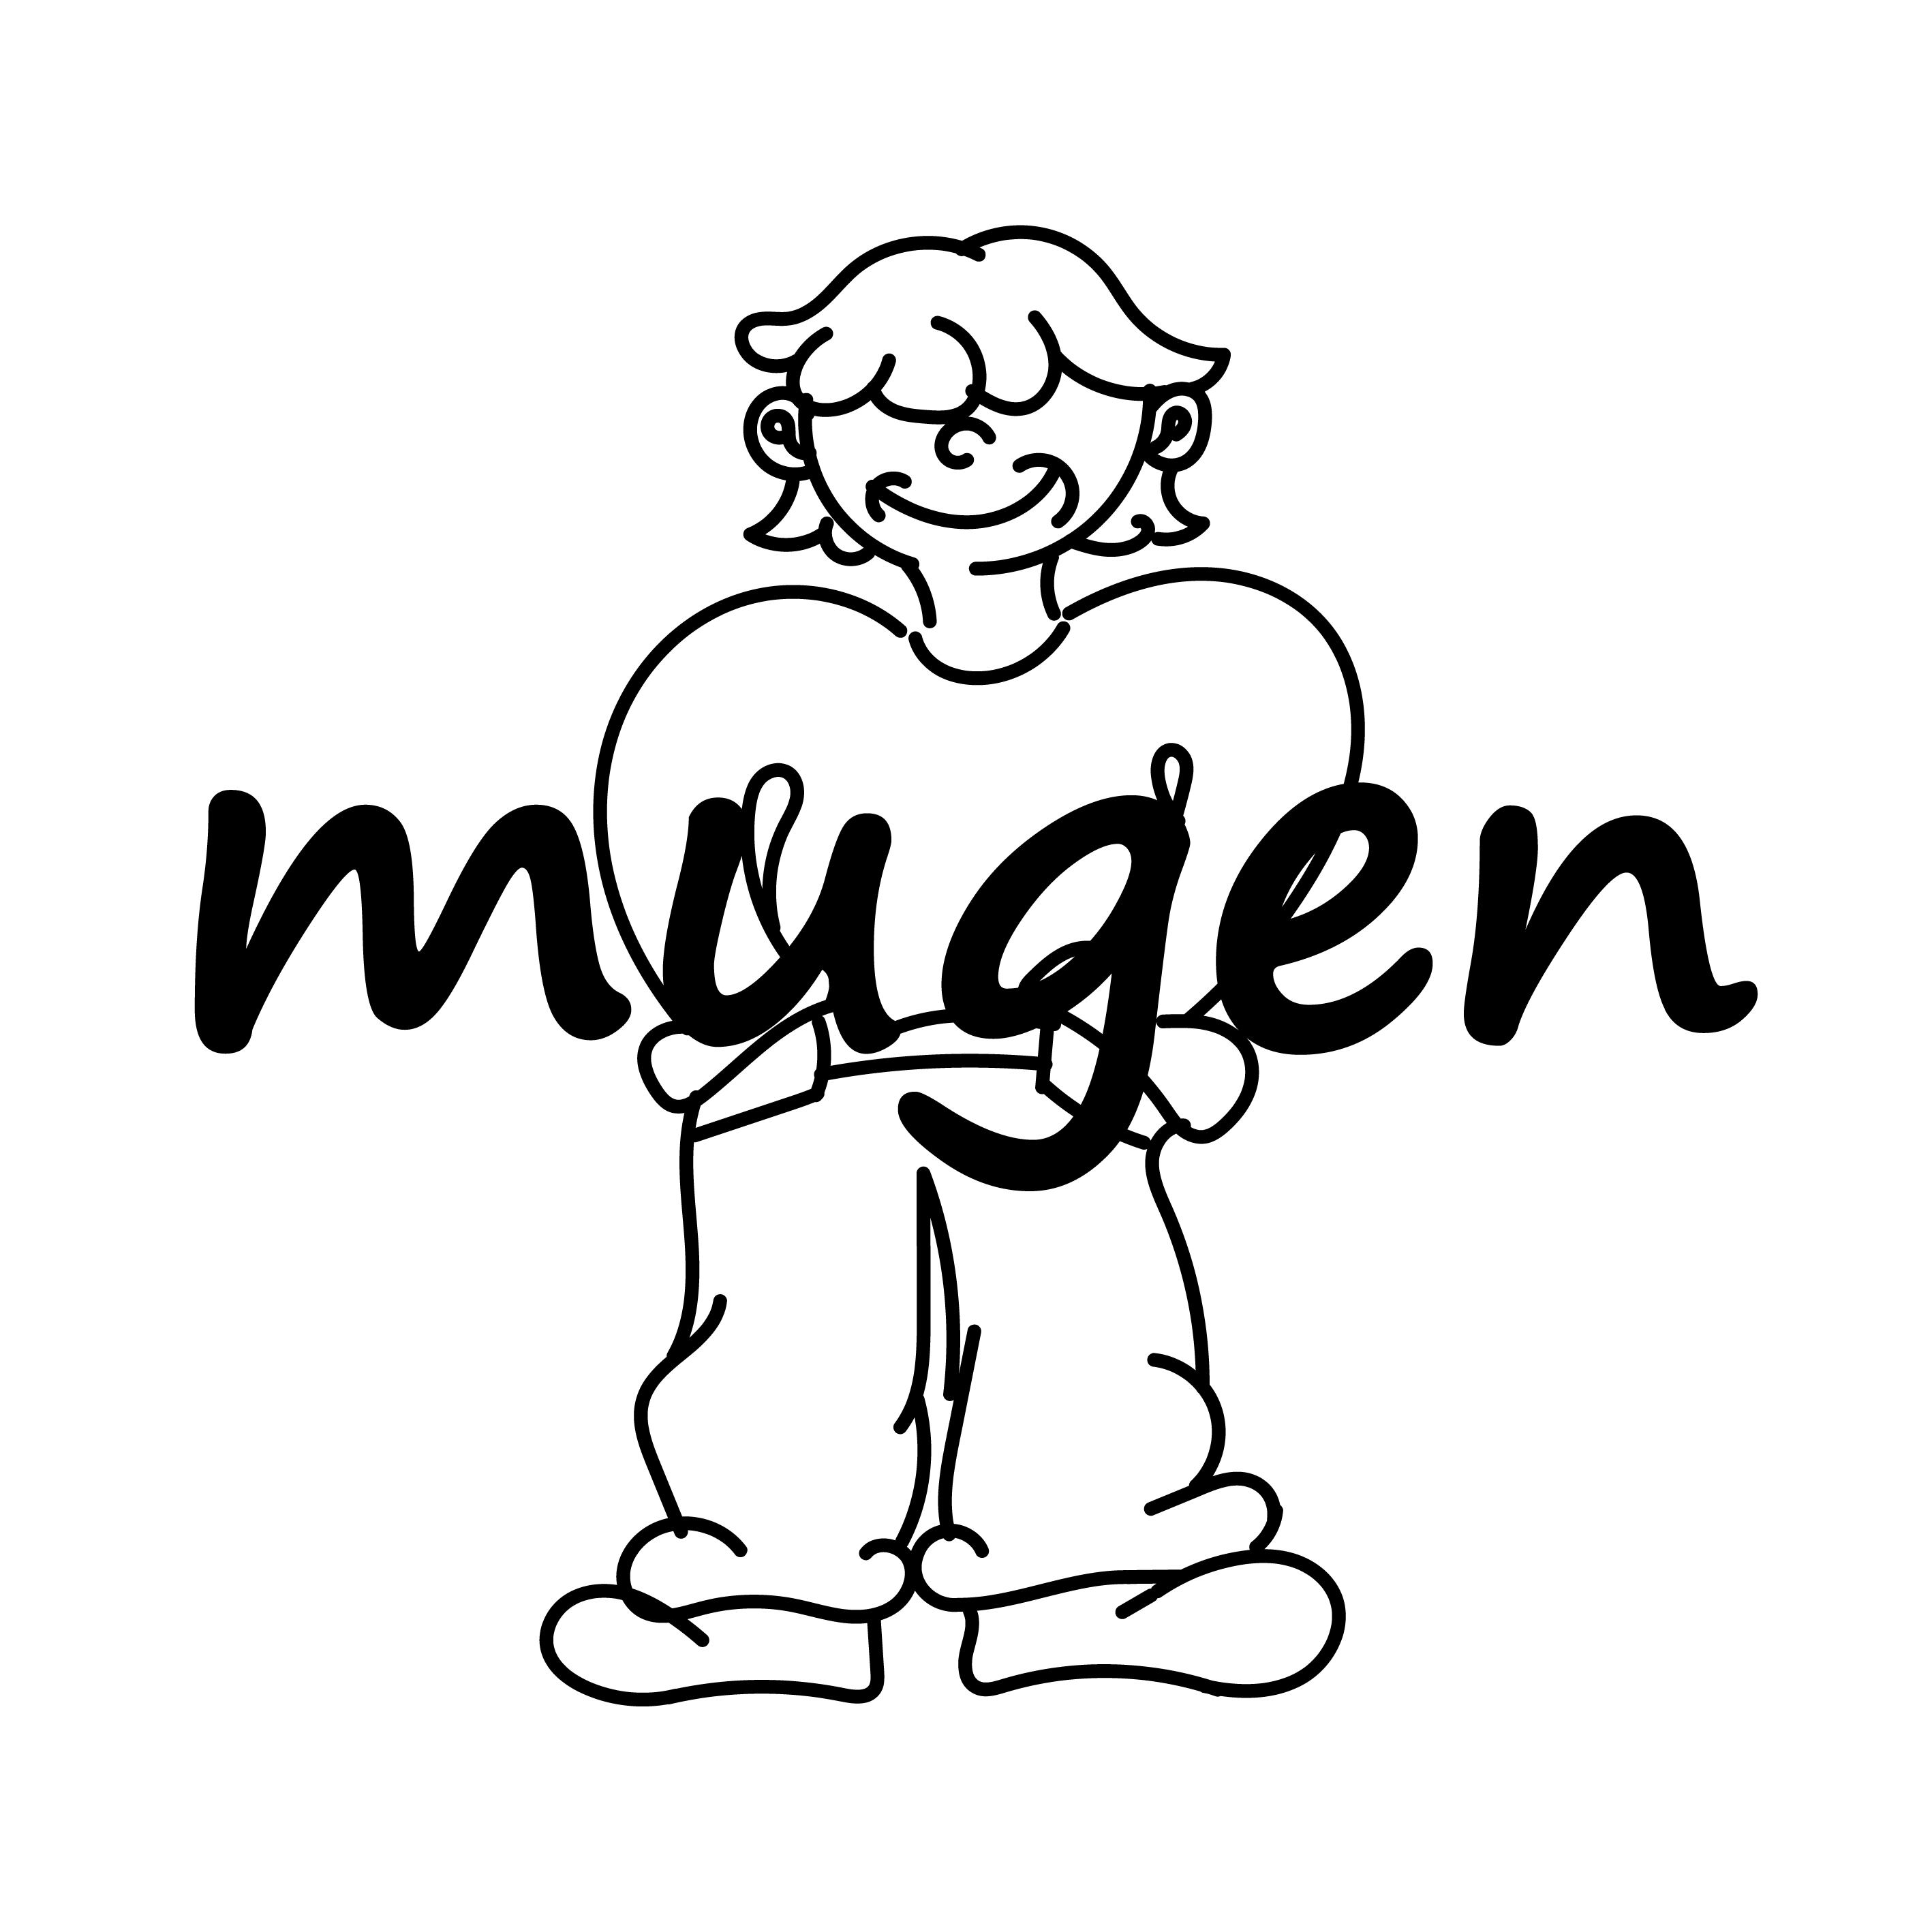 What is mugen?